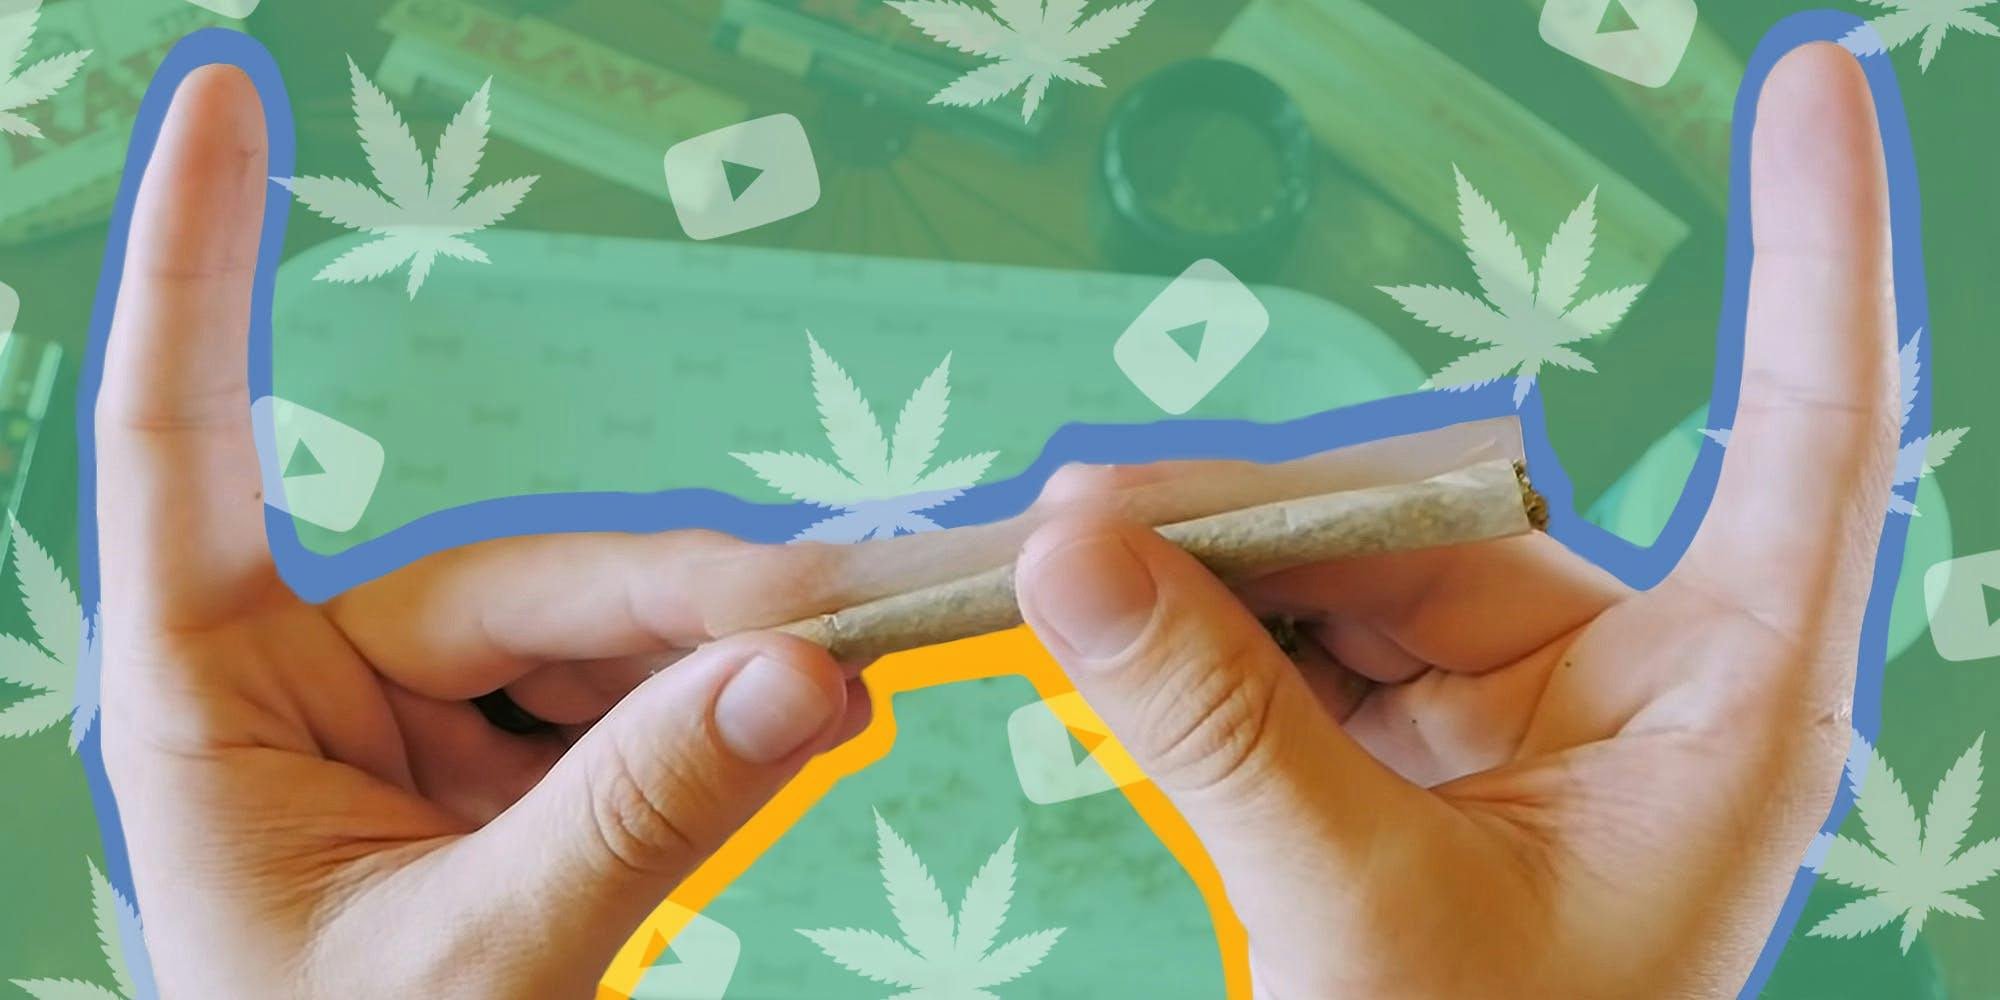 It’s not easy being green: What it’s really like to be a WeedTuber